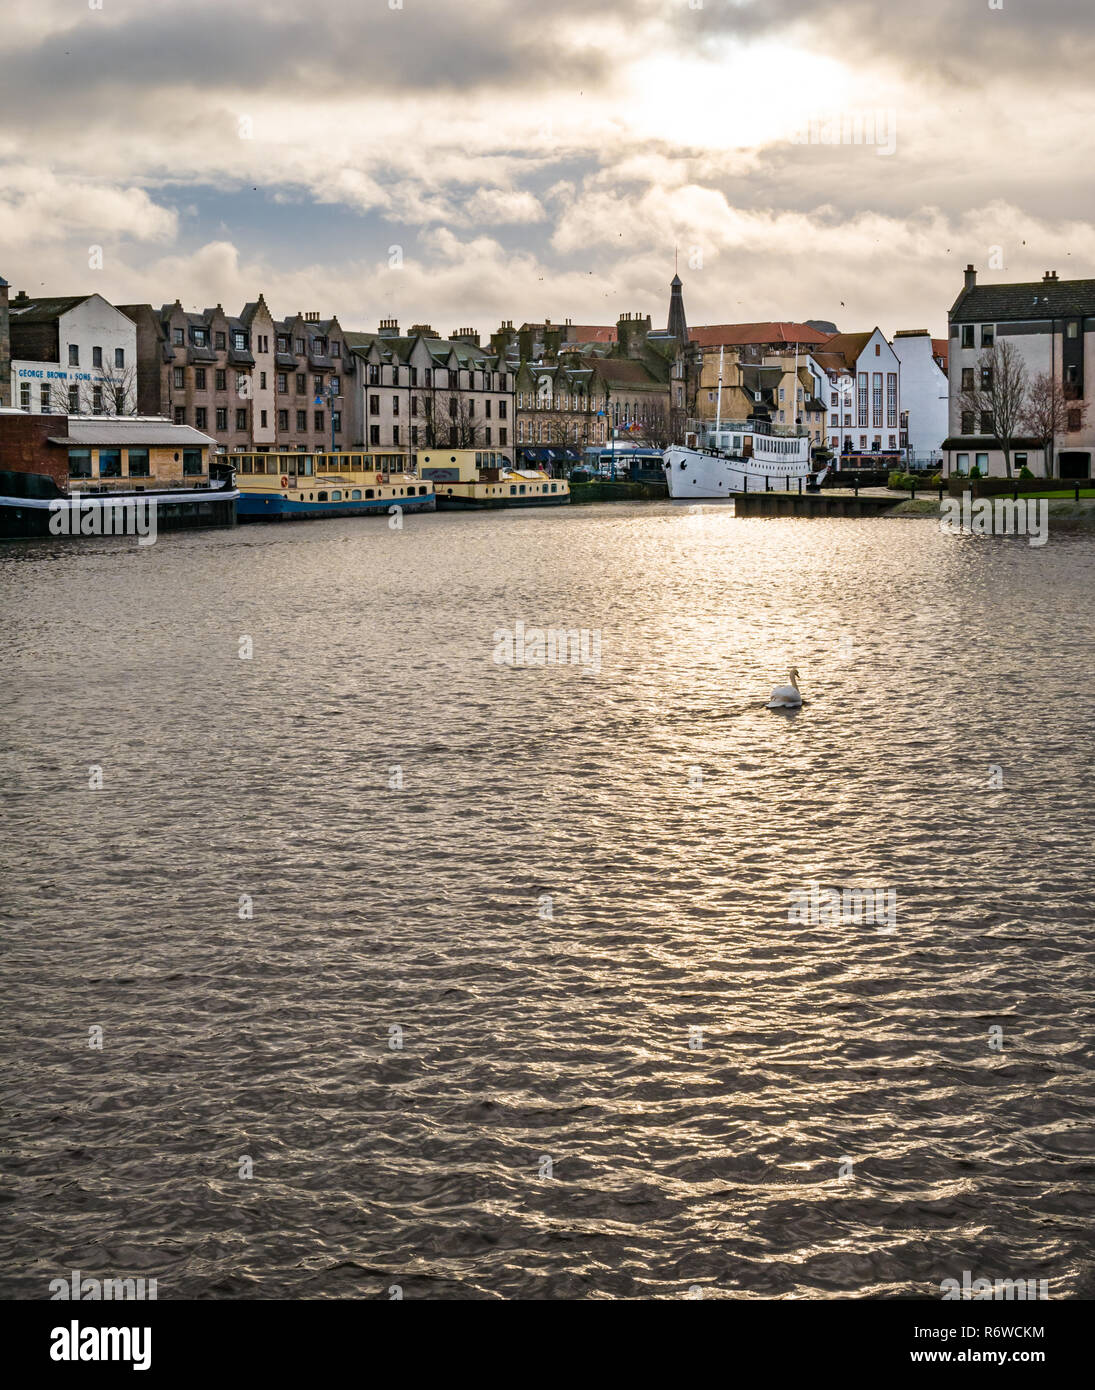 Houseboats, river barges and historic buildings with solitary swan in light on water, The Shore, Leith, Edinburgh, Scotland, UK Stock Photo